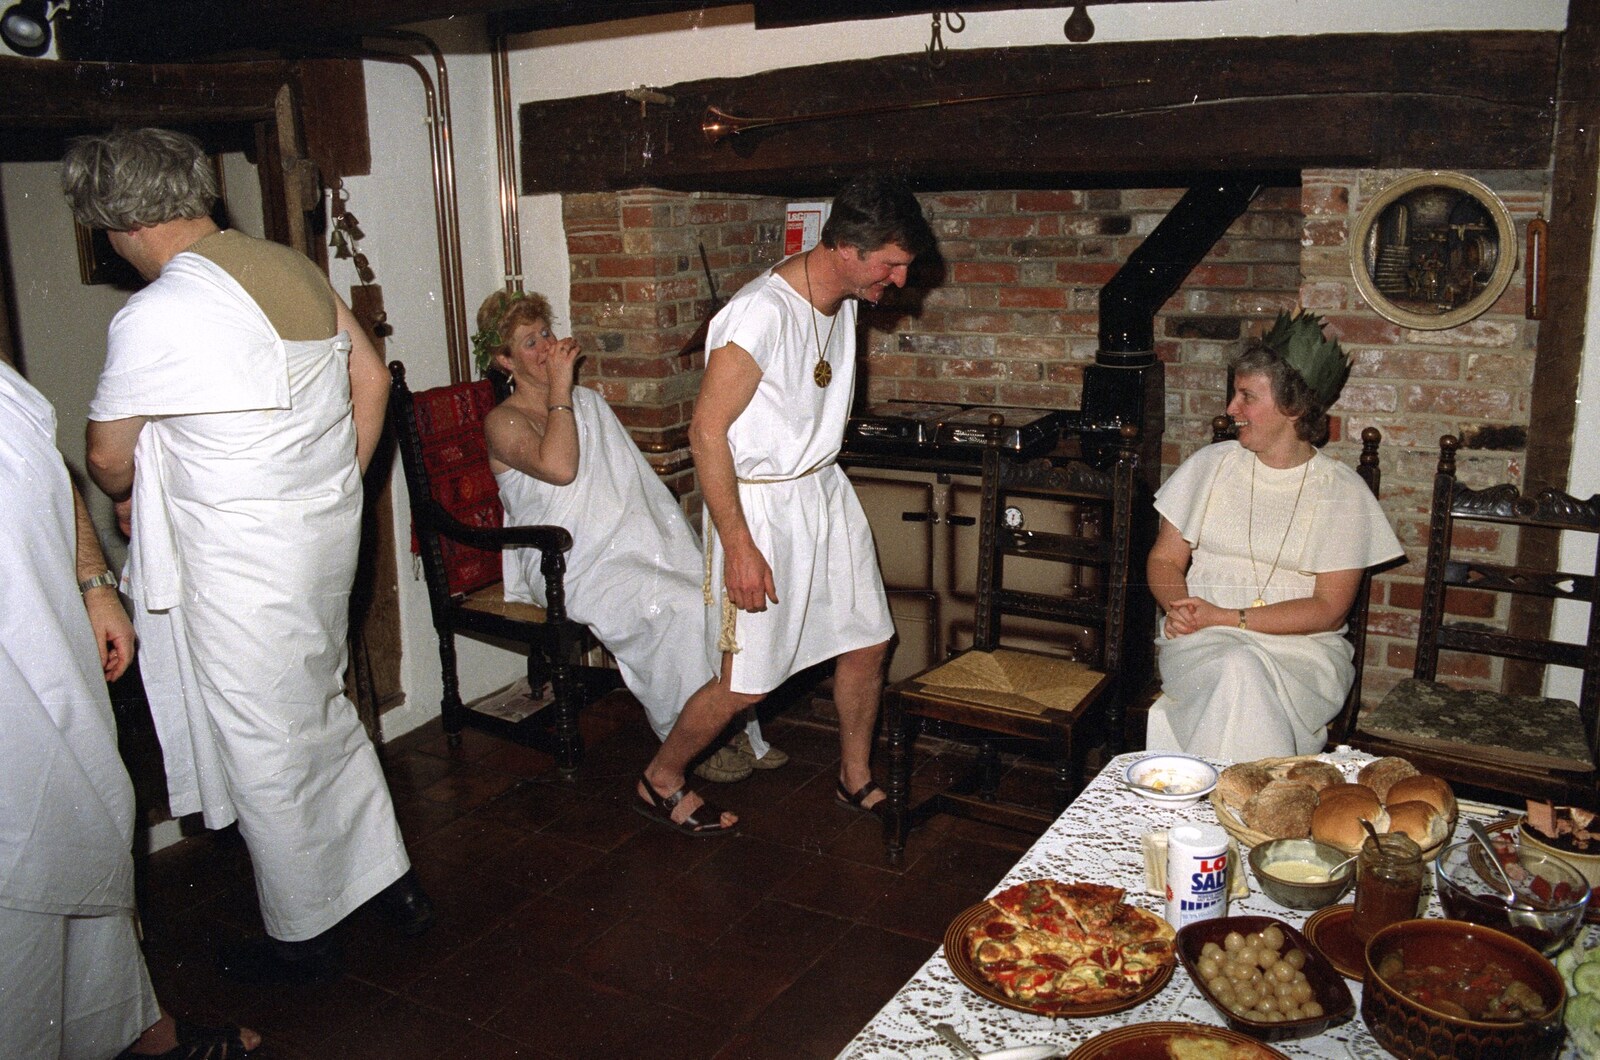 Geoff stomps around from Geoff and Brenda's Pre-Christmas Toga Party, Stuston, Suffolk - 17th December 1991